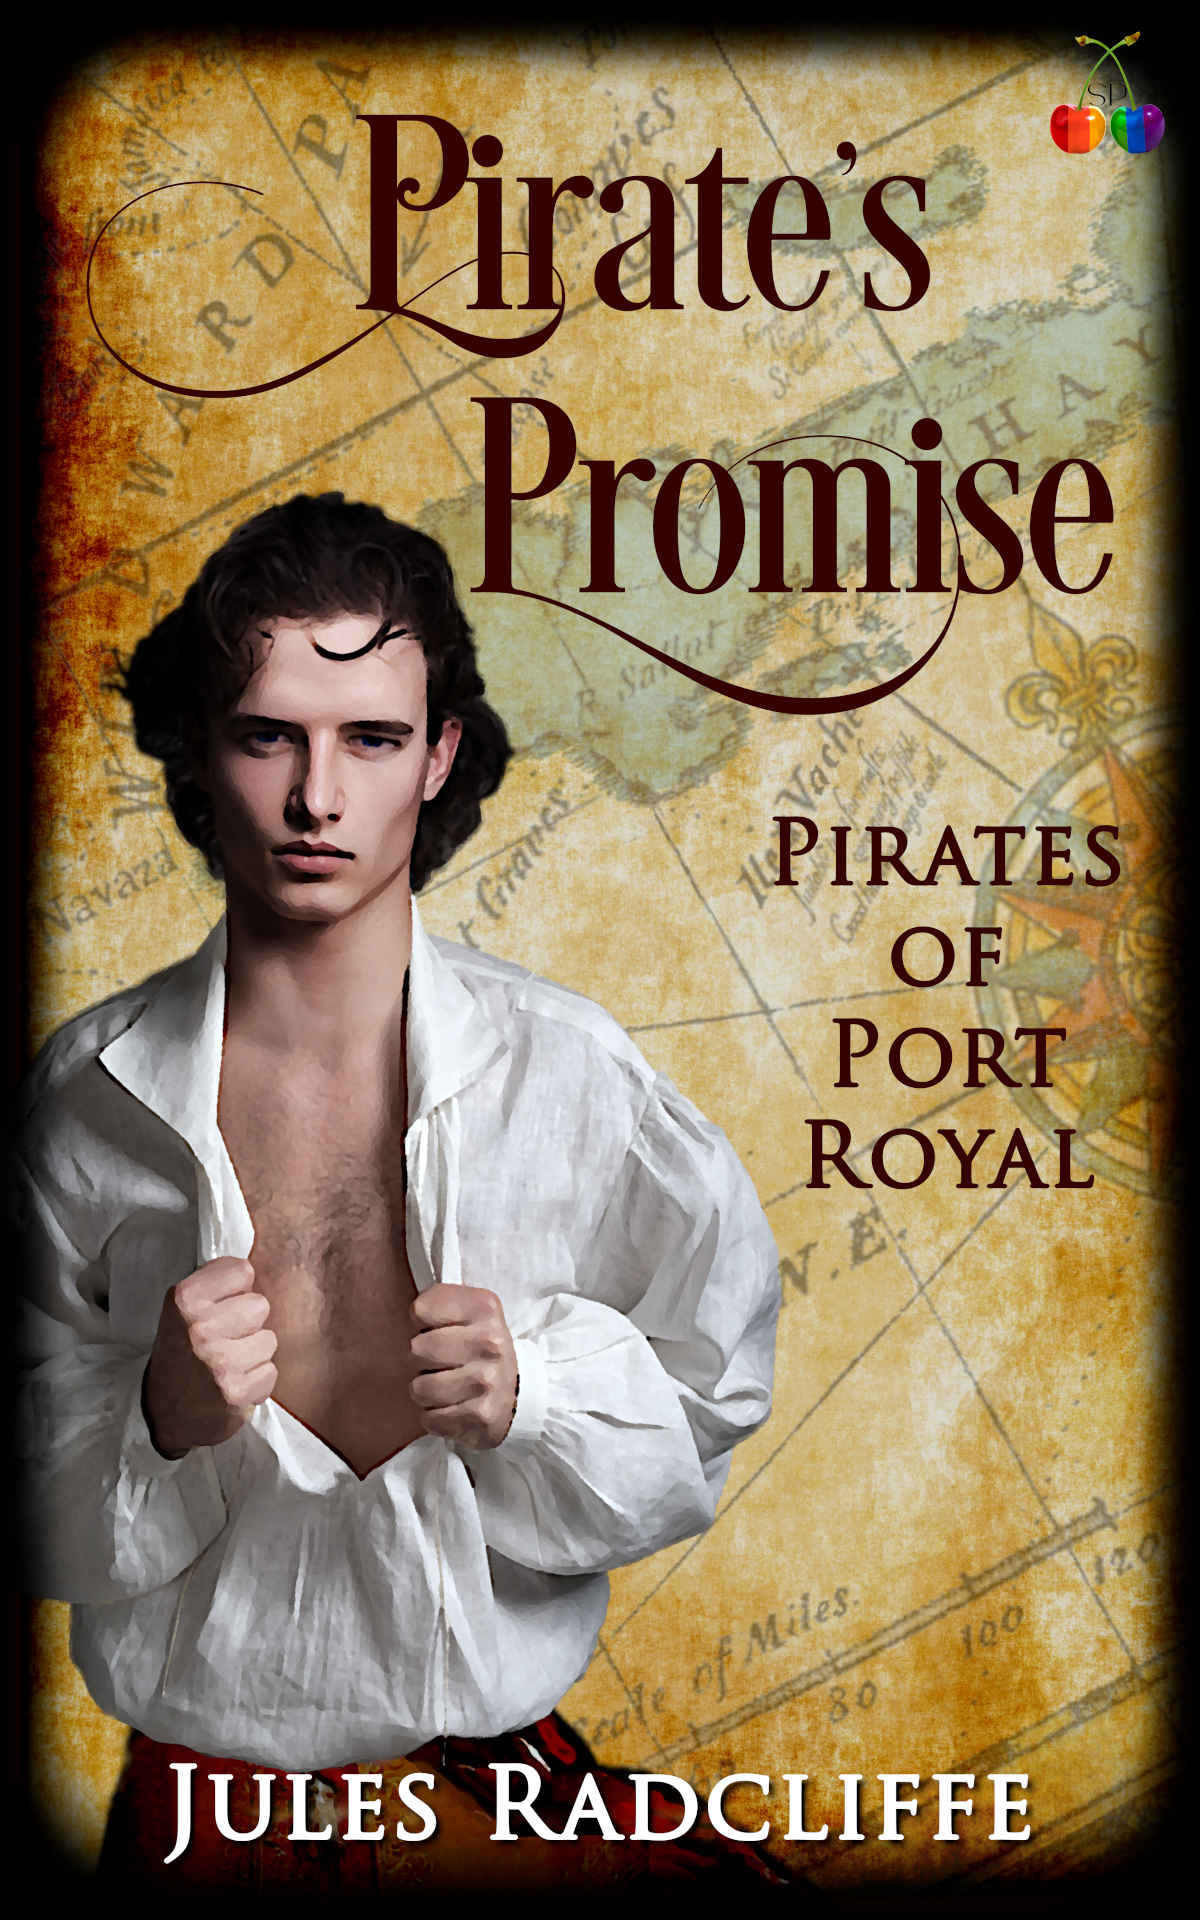 Cover of Pirates Promise by Jules Radcliffe